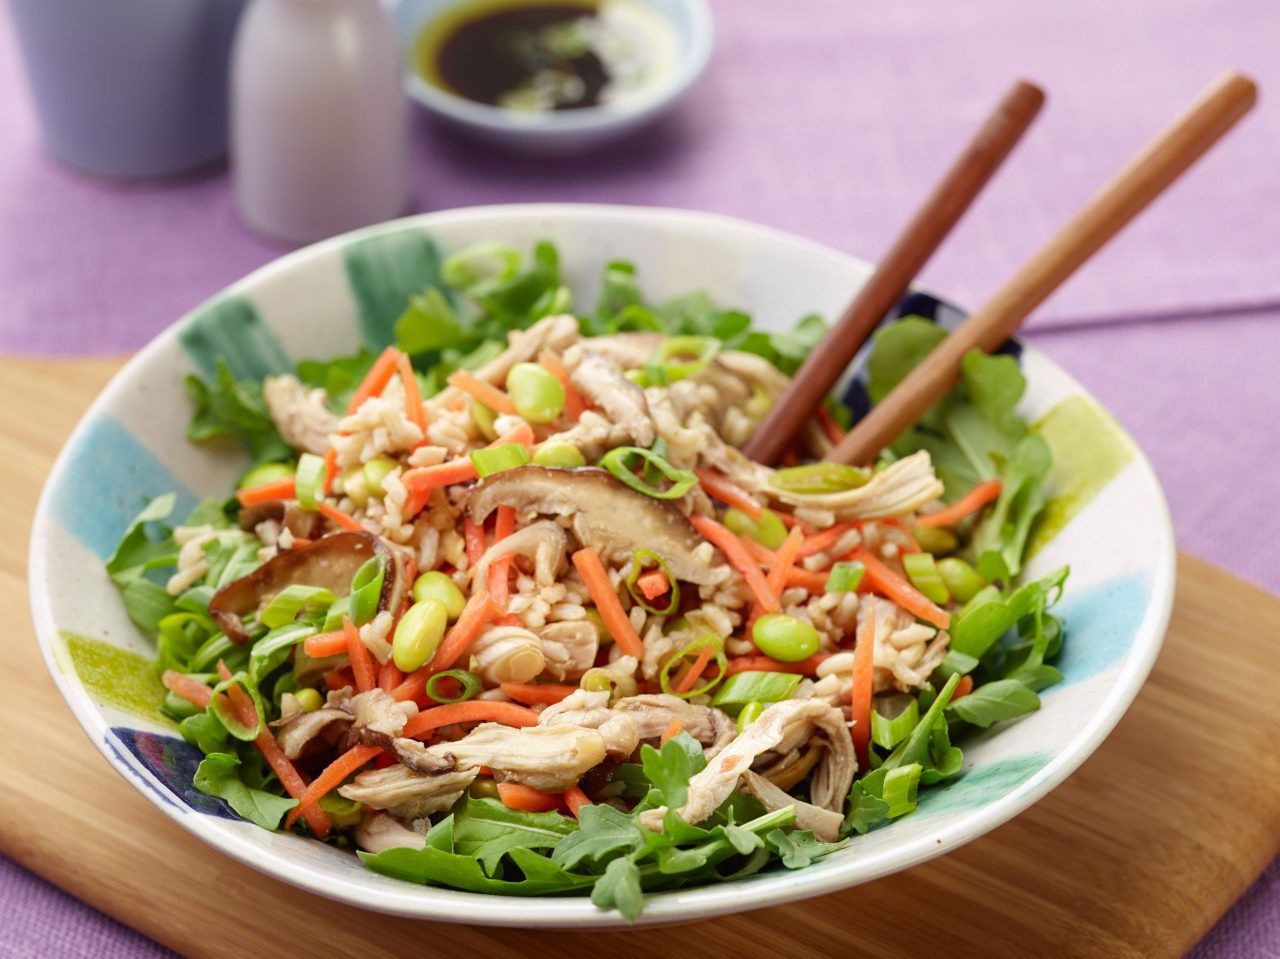 Food Network Kitchen's 15-Minute Asian Rice Salad.